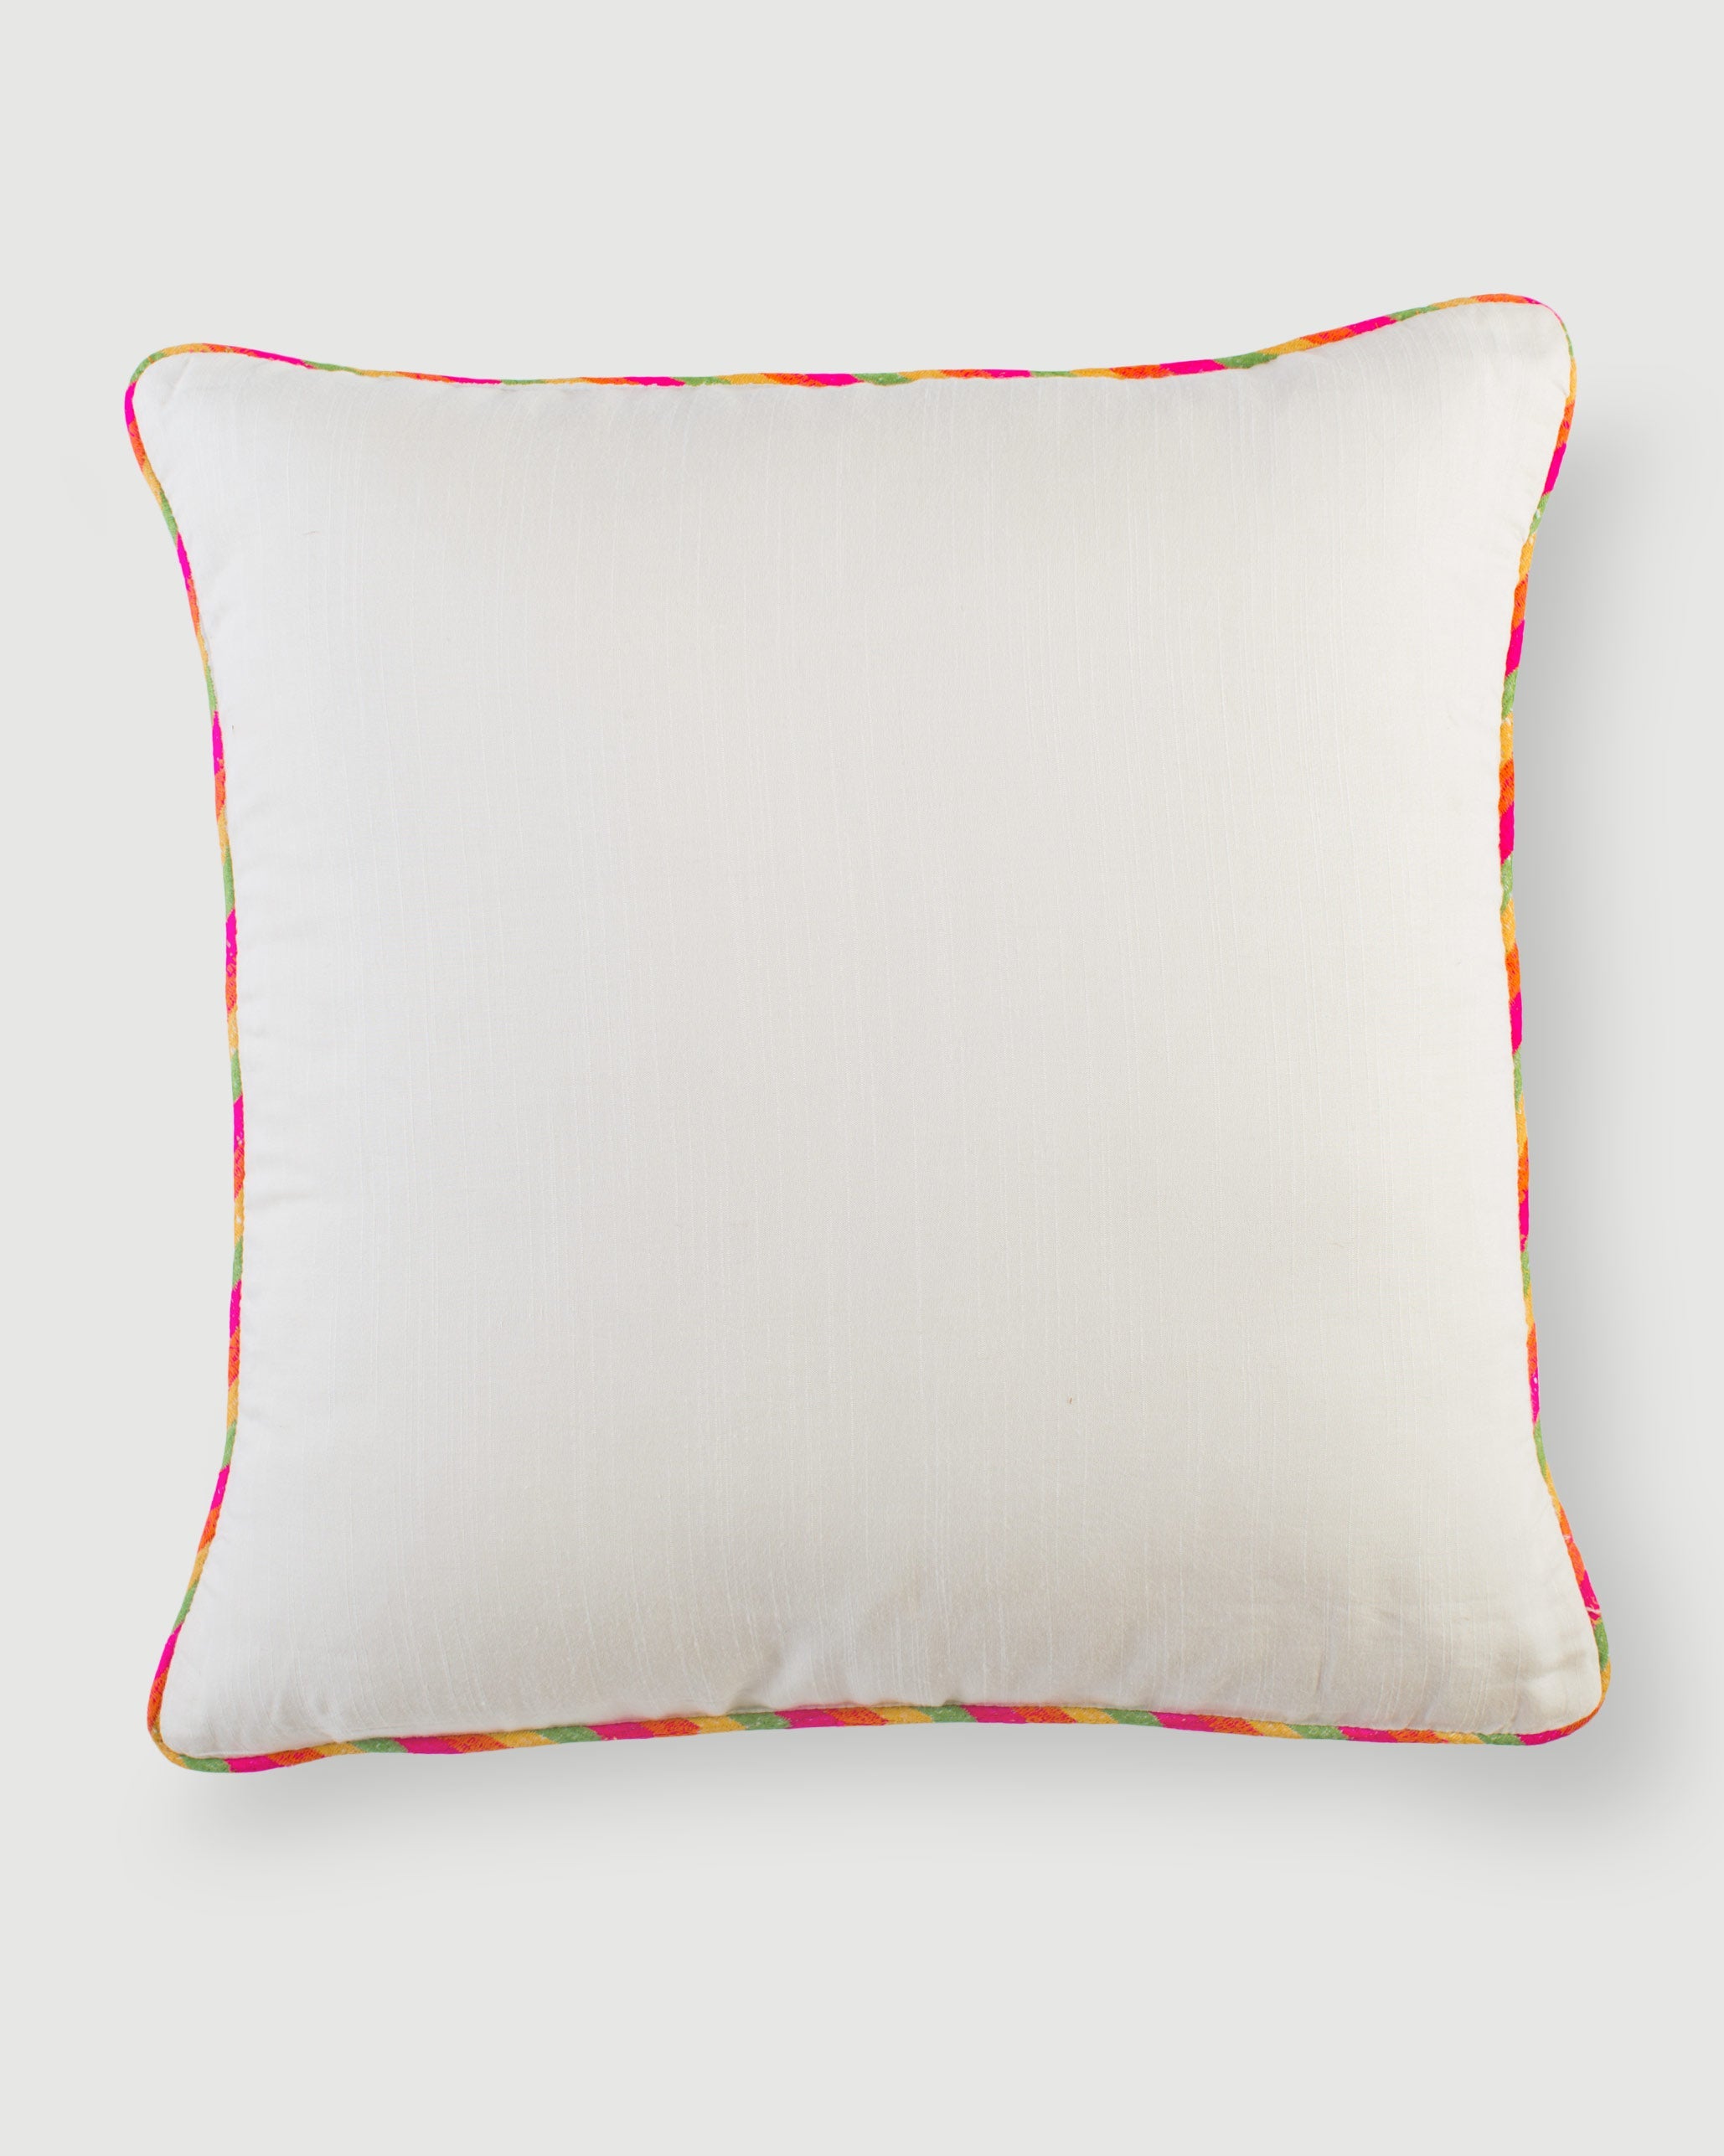 Tussar Cushion Cover - Ivory